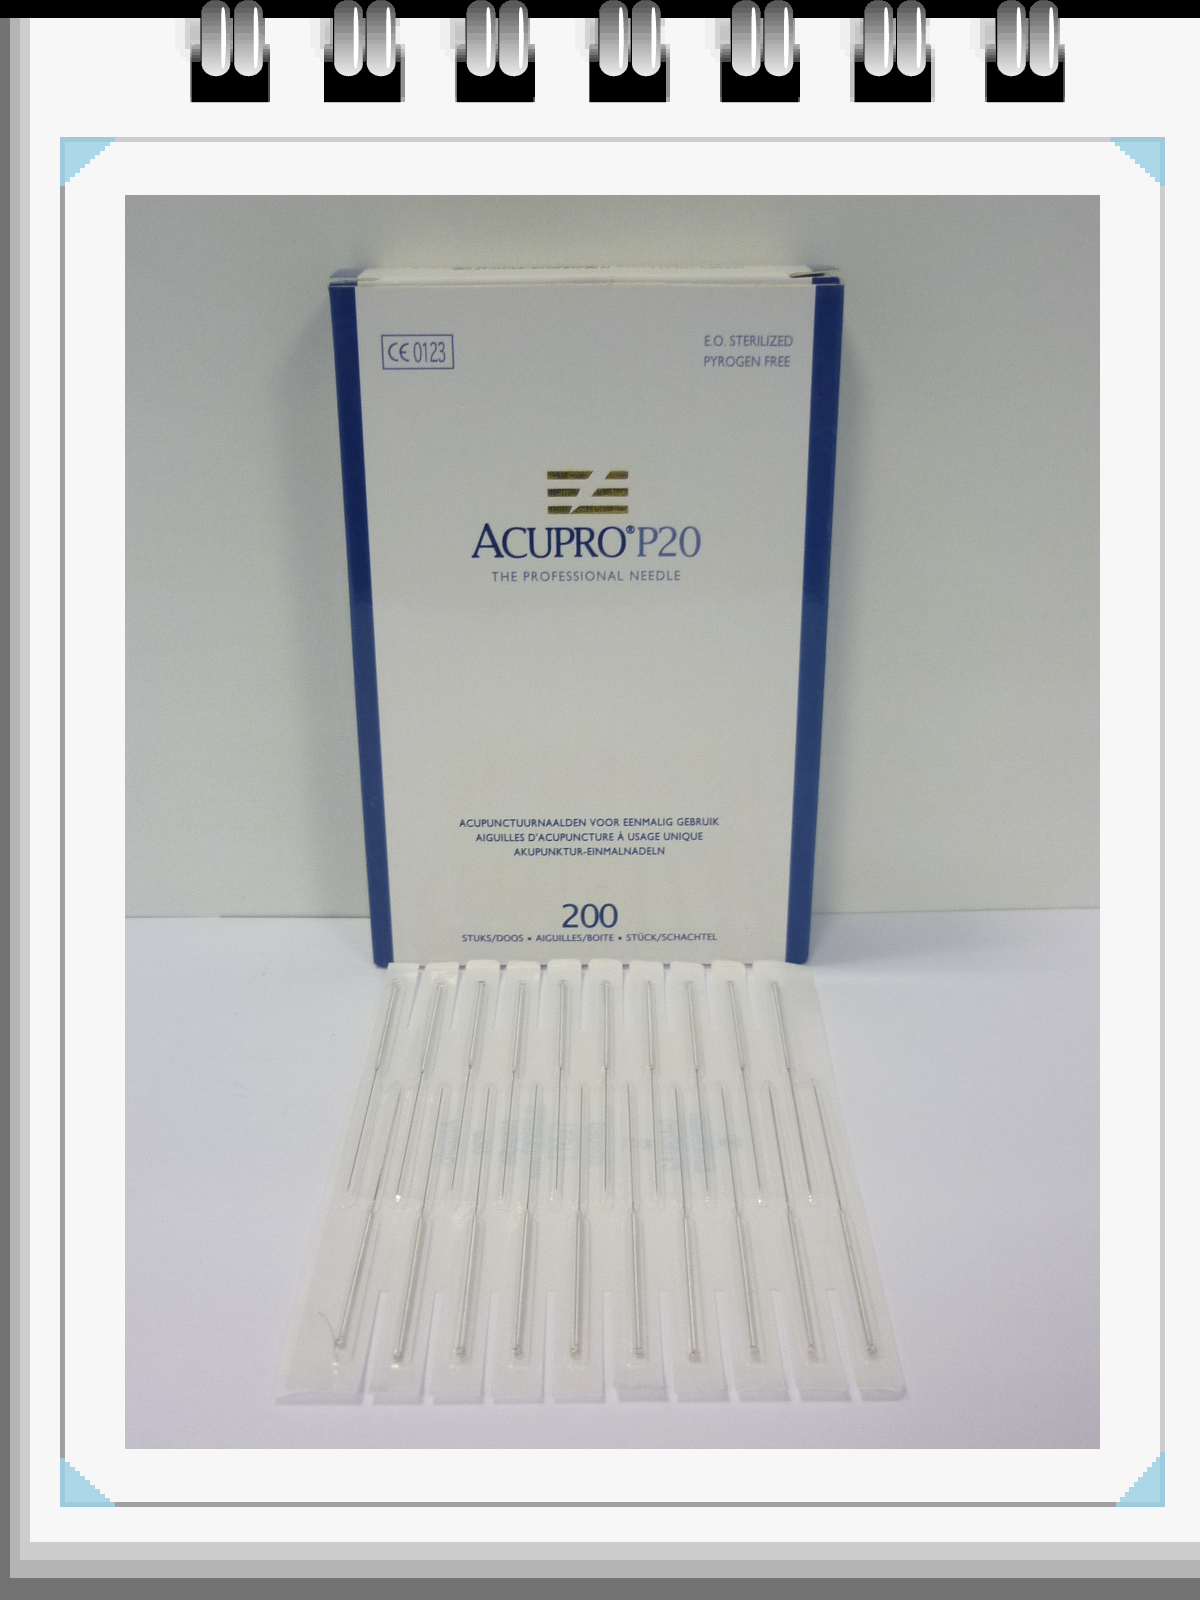 All Products - Acupuncture naalden 0,22 x 40mm - p--200